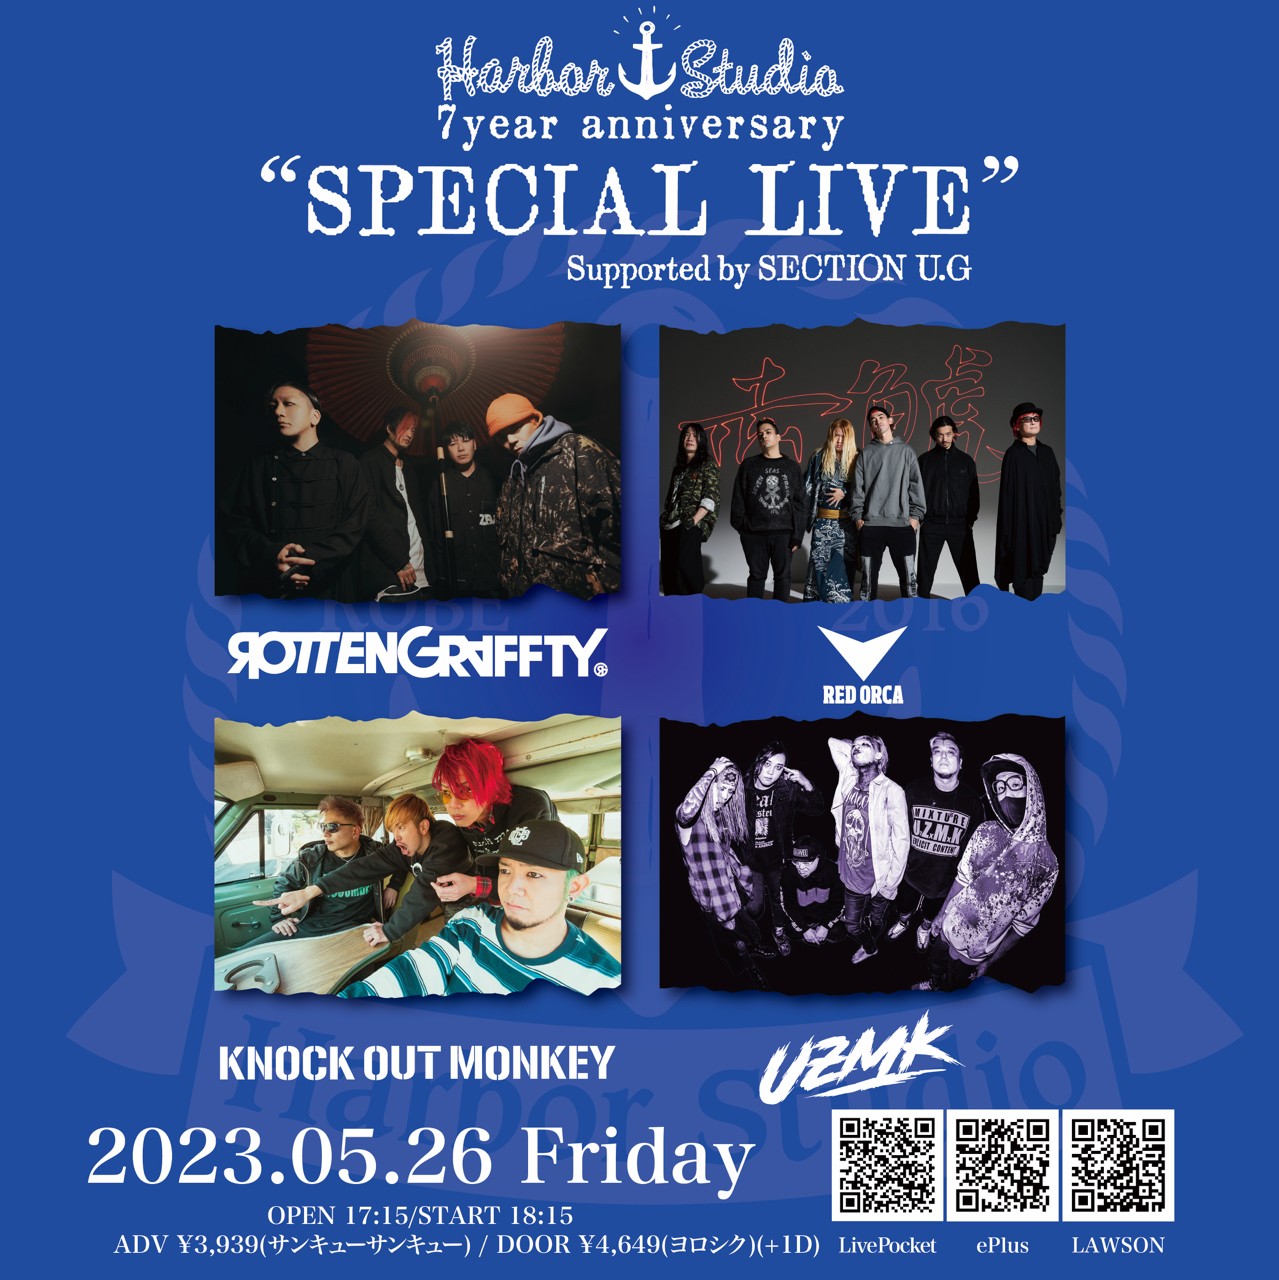 Harbor Studio 7year anniversary “SPECIAL LIVE” Supported by SECTION U.G